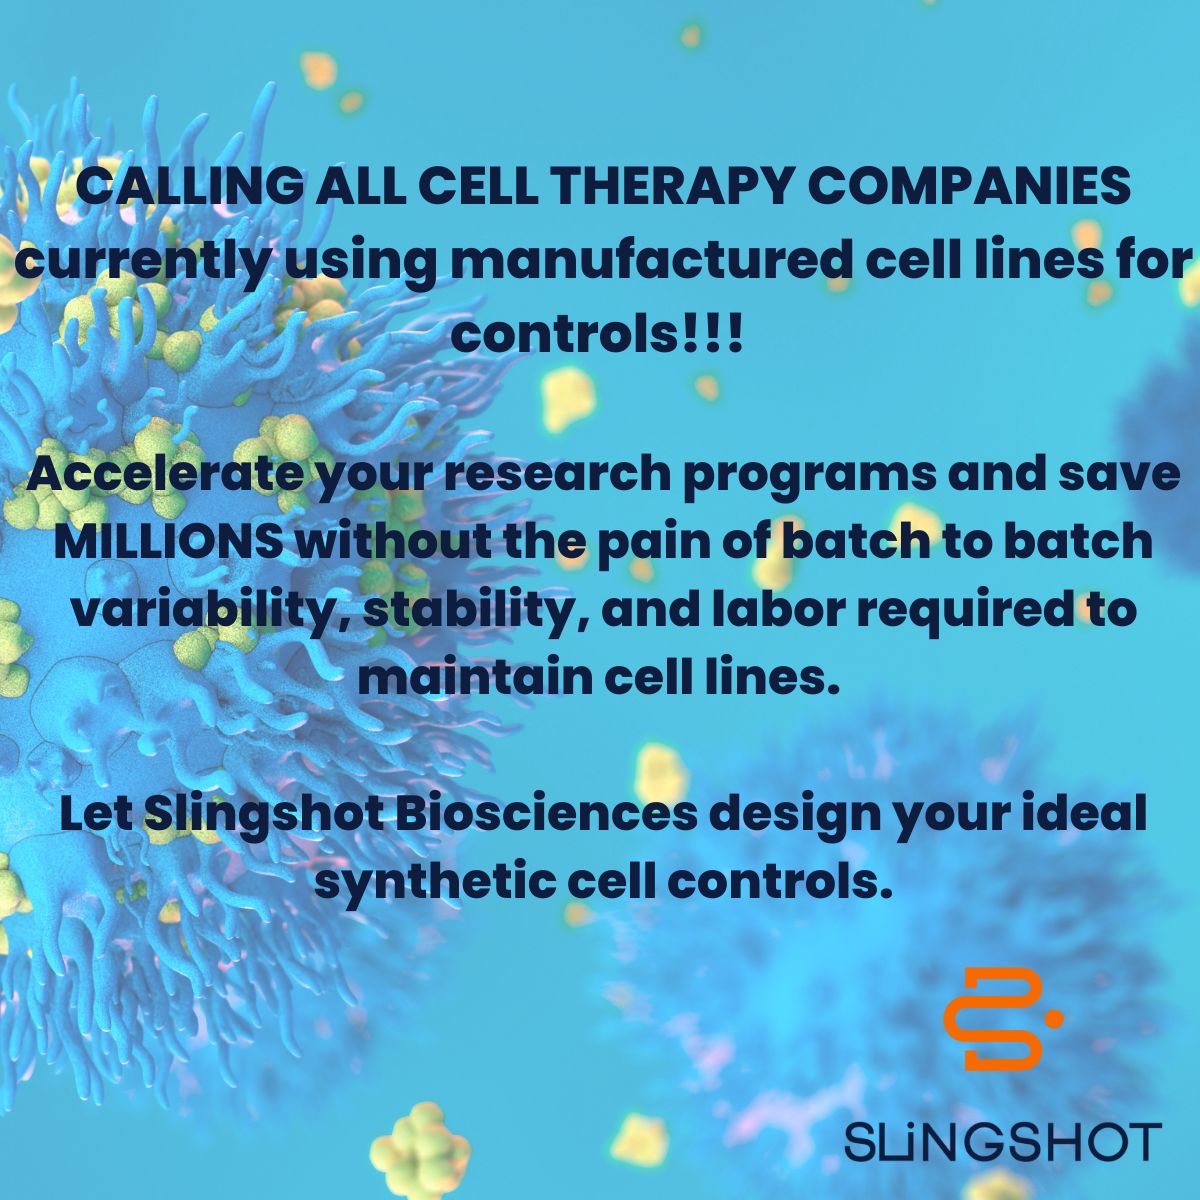 #celltherapymanufacturing #celltherapy #celltherapies #savetimeandmoney #customdesign #syntheticcells